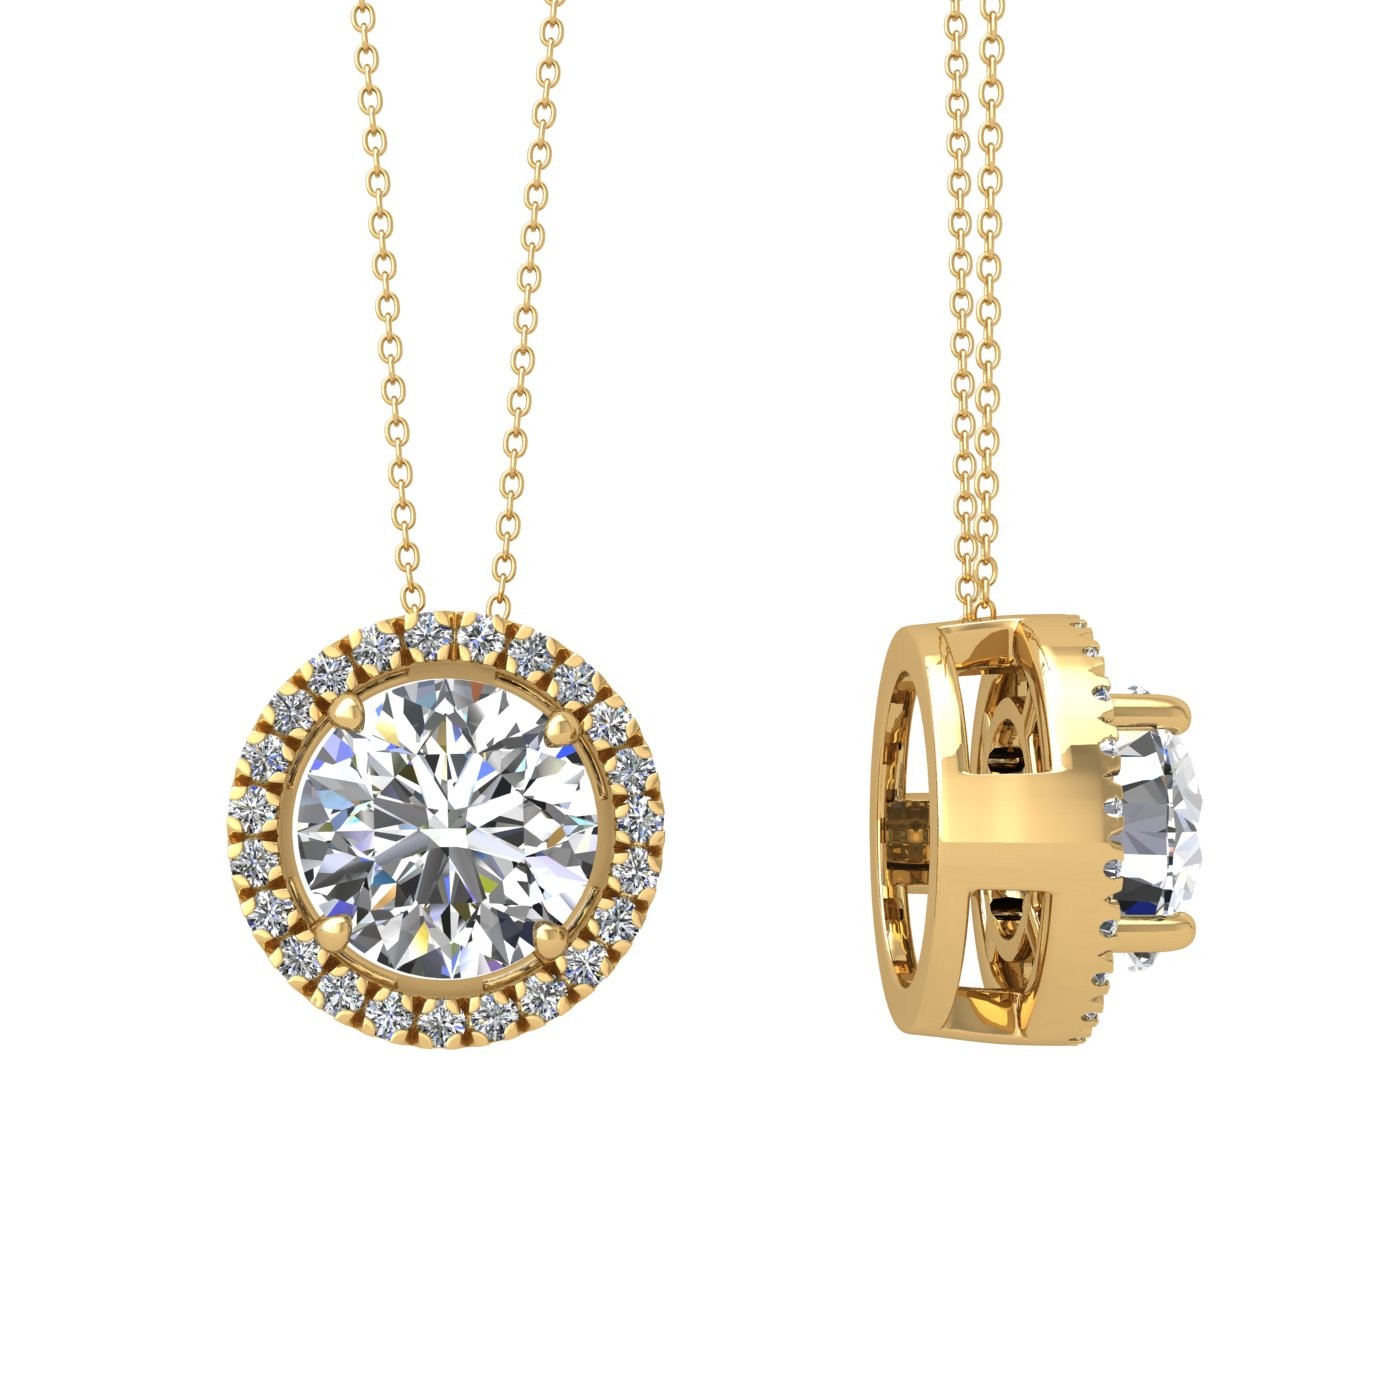 18k yellow gold  0,7 ct 4 prong round shape diamond pendant with diamond pavÉ set halo including chain seperate from the pendant